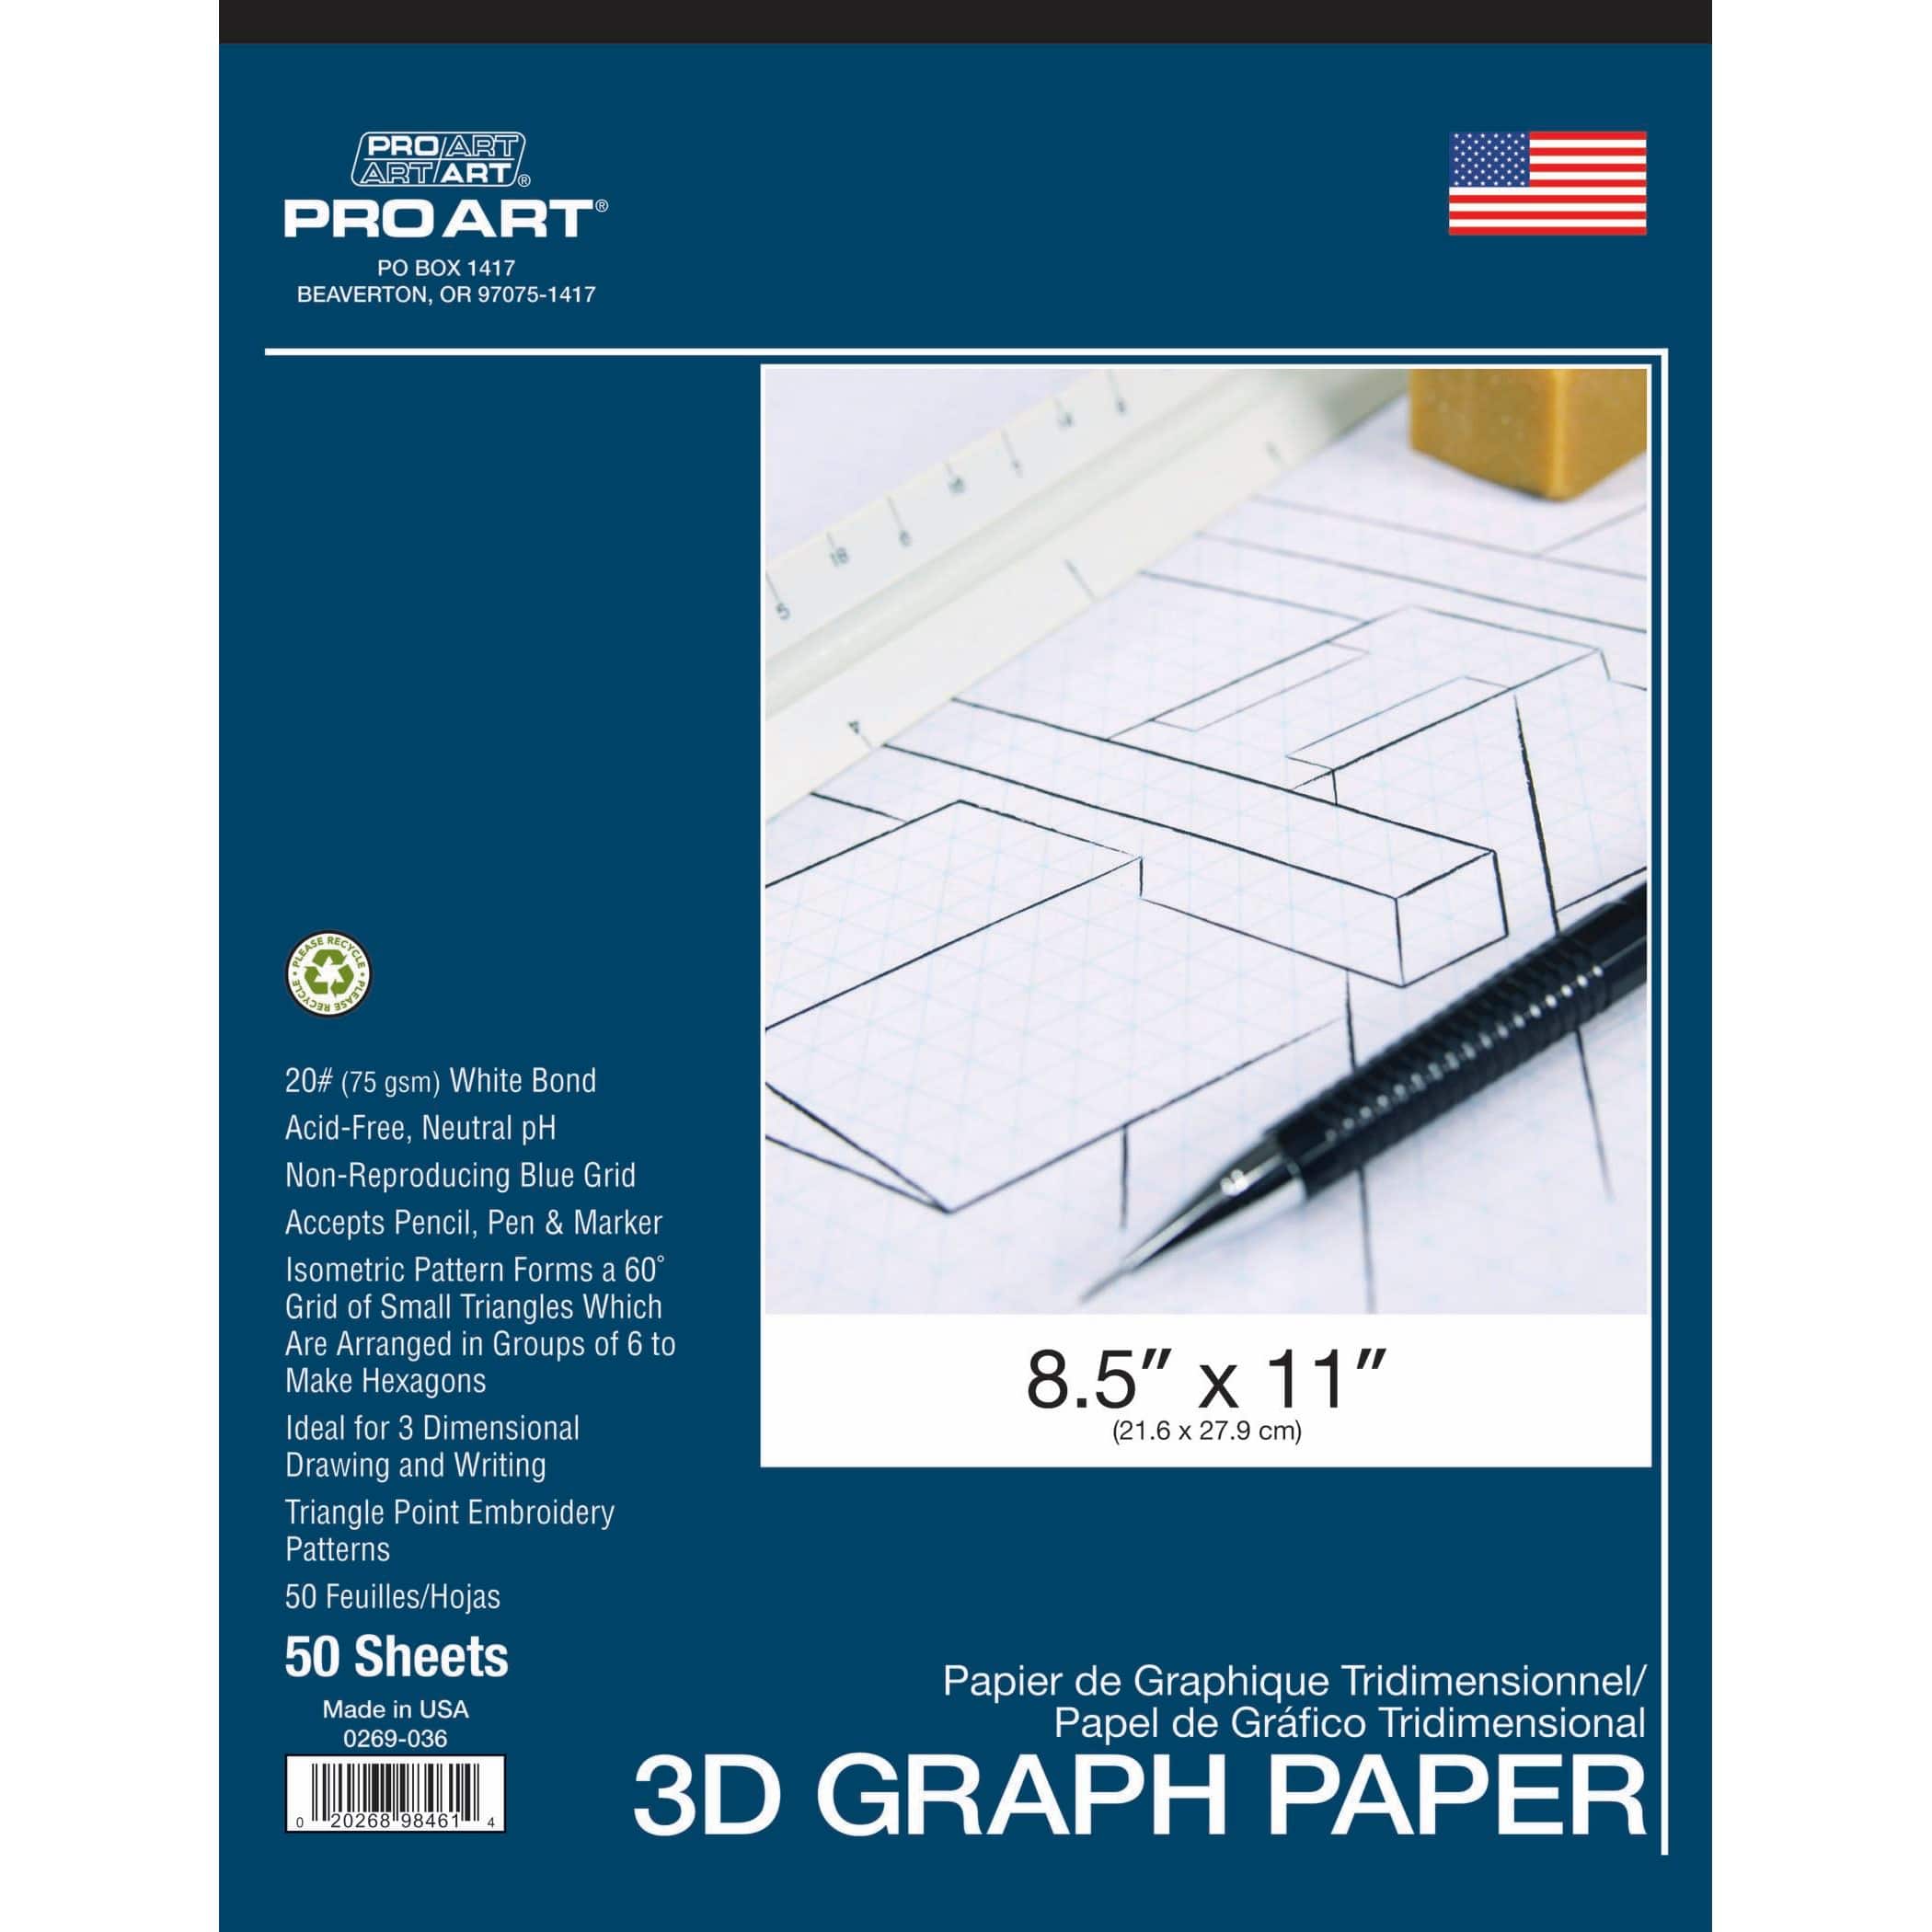 School Smart Graph Paper, 1 Inch Rule, 9 x 12 Inches, Manila, Pack of 500